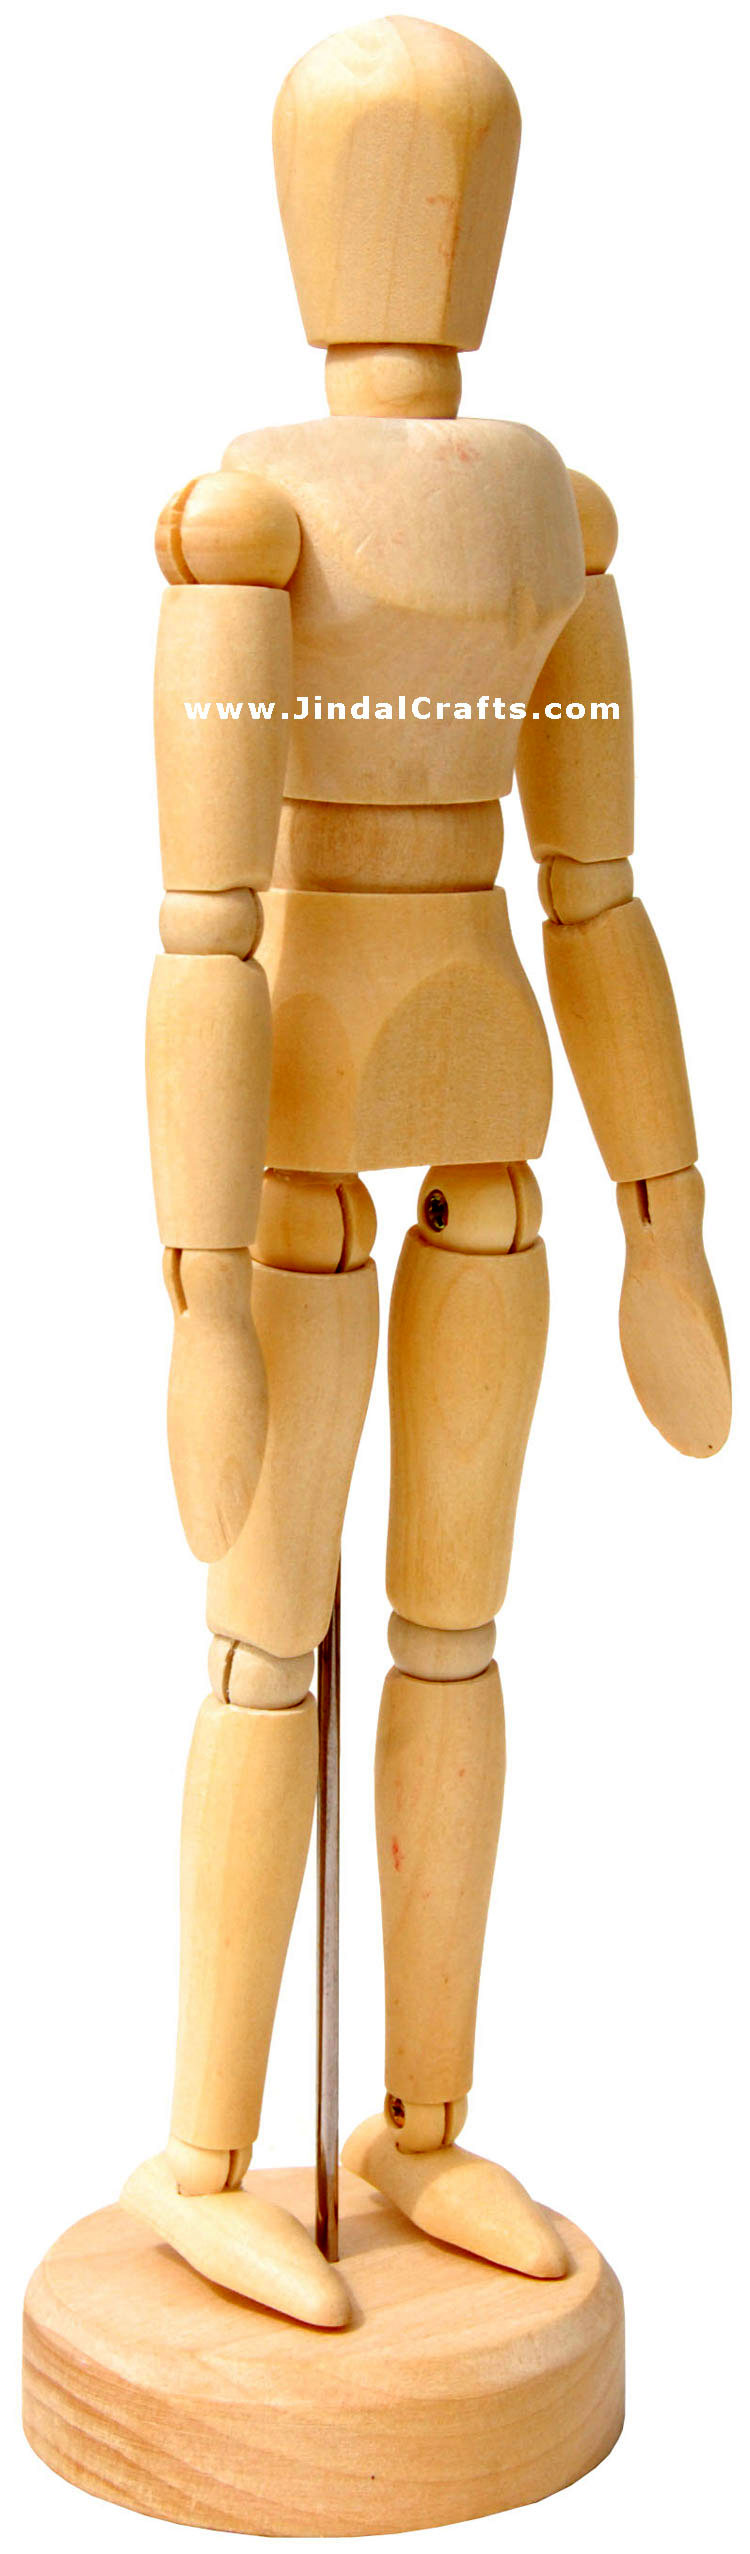 Handmade Wooden Free Body Toy India Traditional